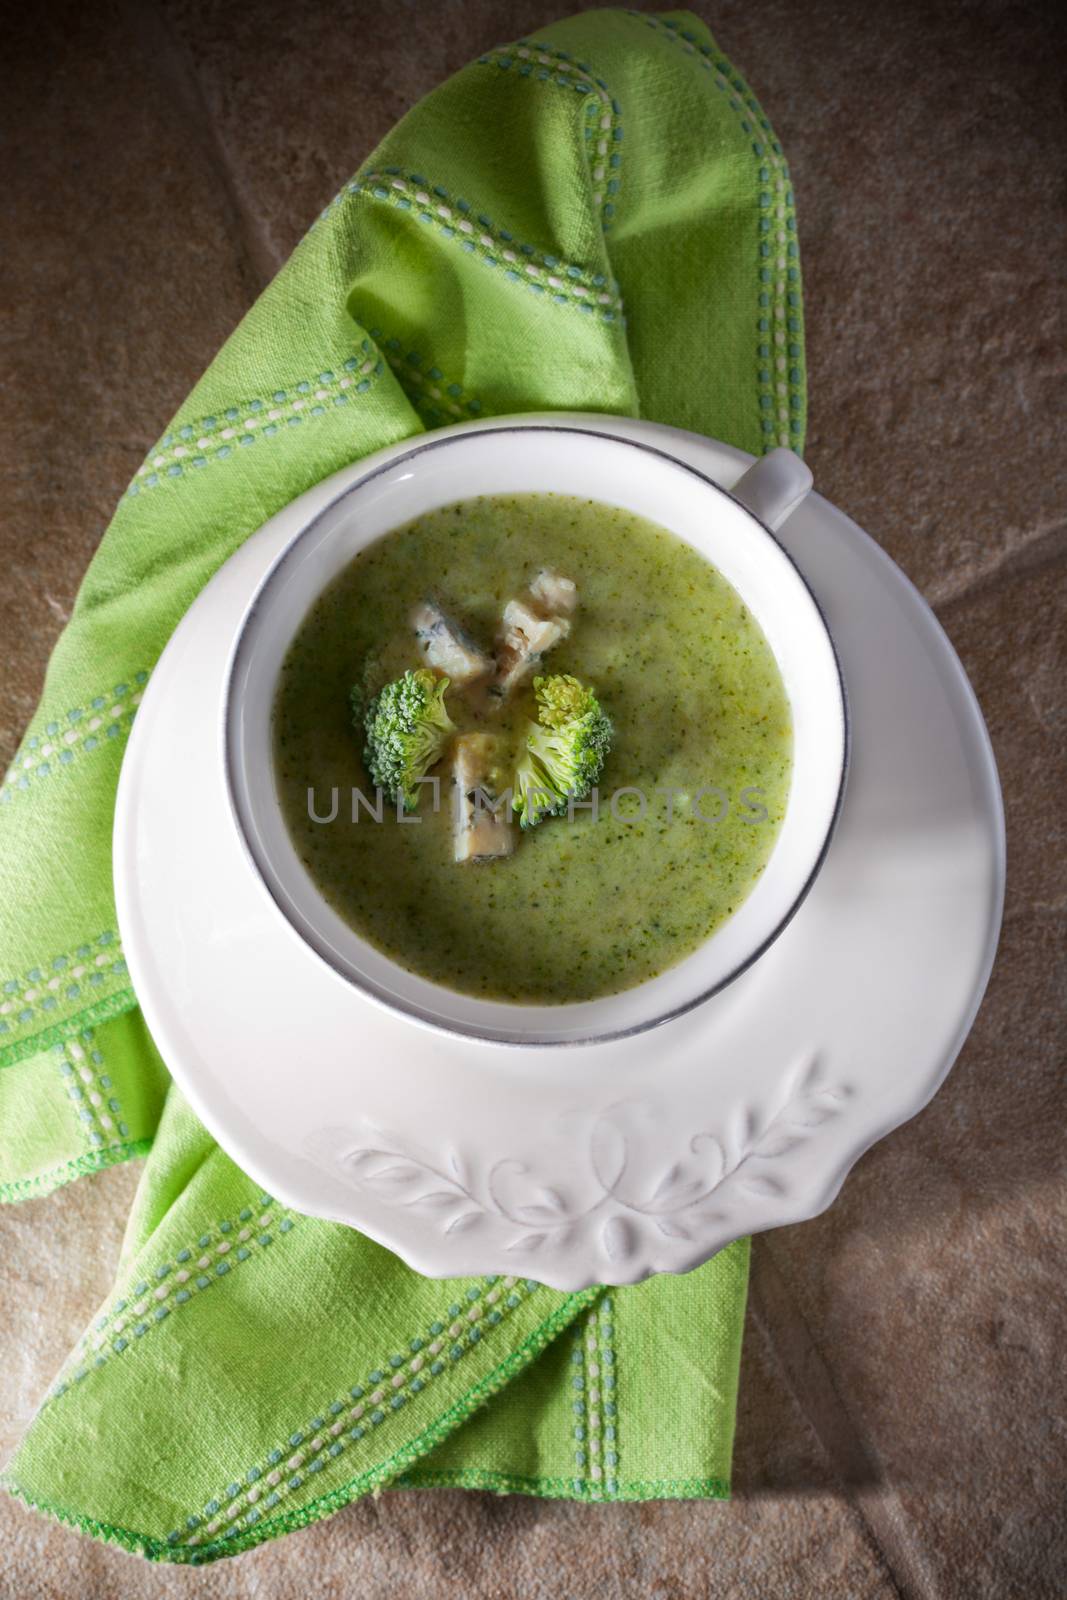 A bowl of creamy broccoli soup with blue cheese


